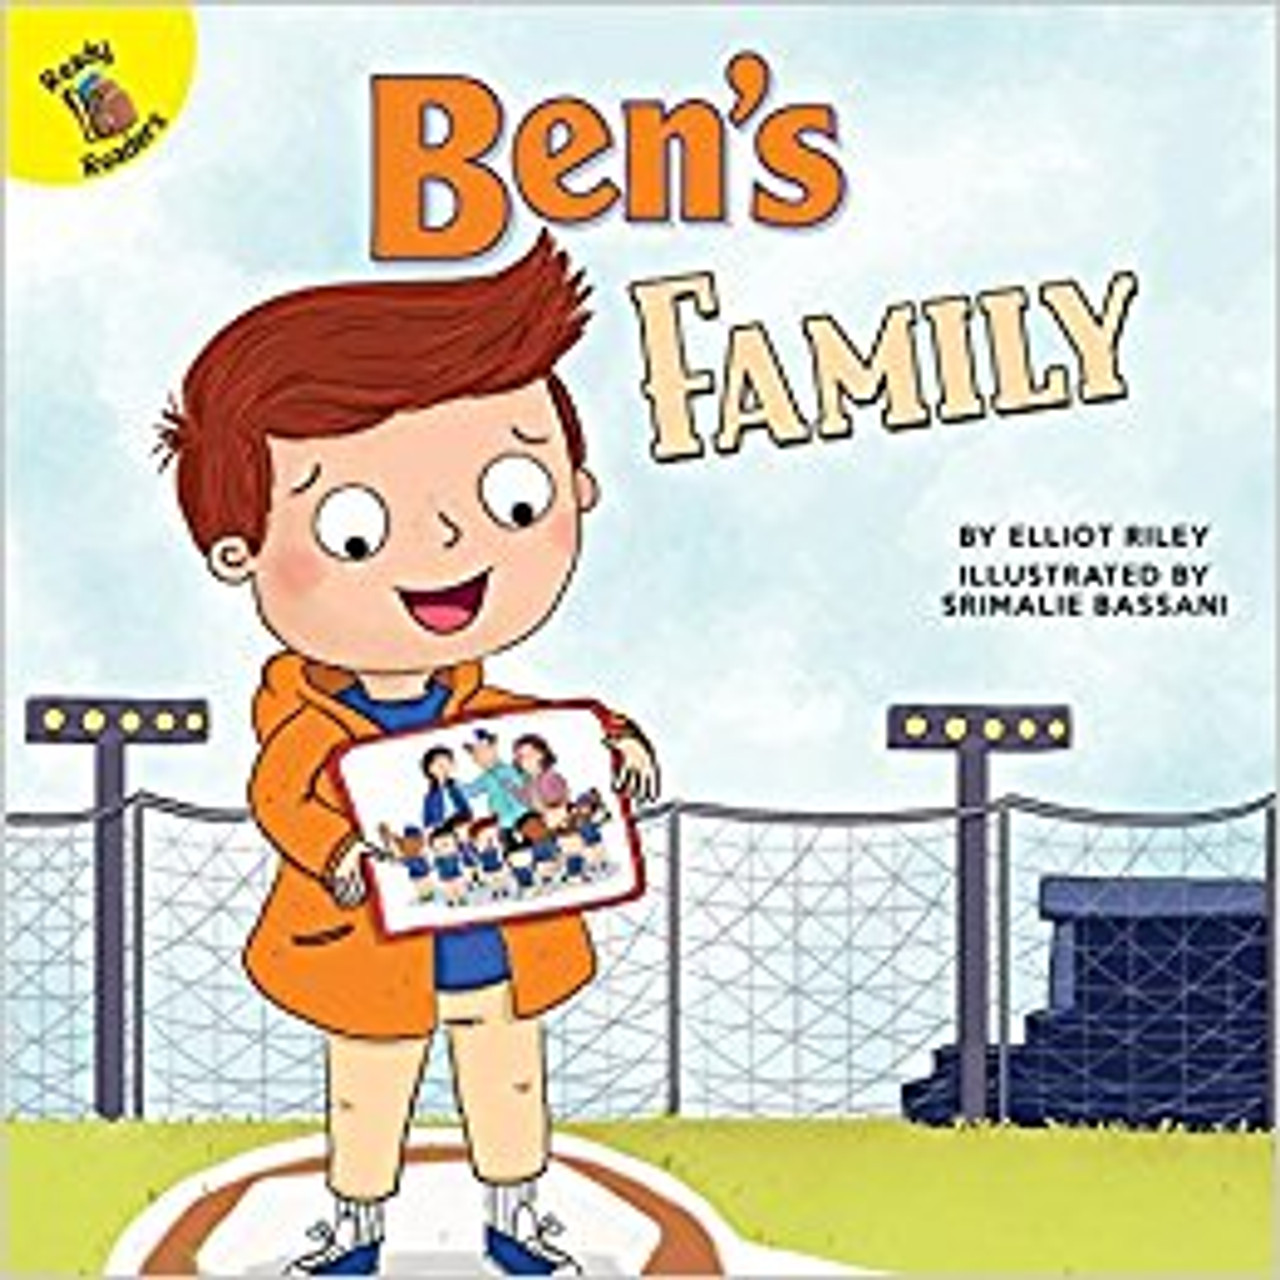 Easy reader introduces a young baseball player and his mother, highlighting their family dynamics and celebrating diversity.